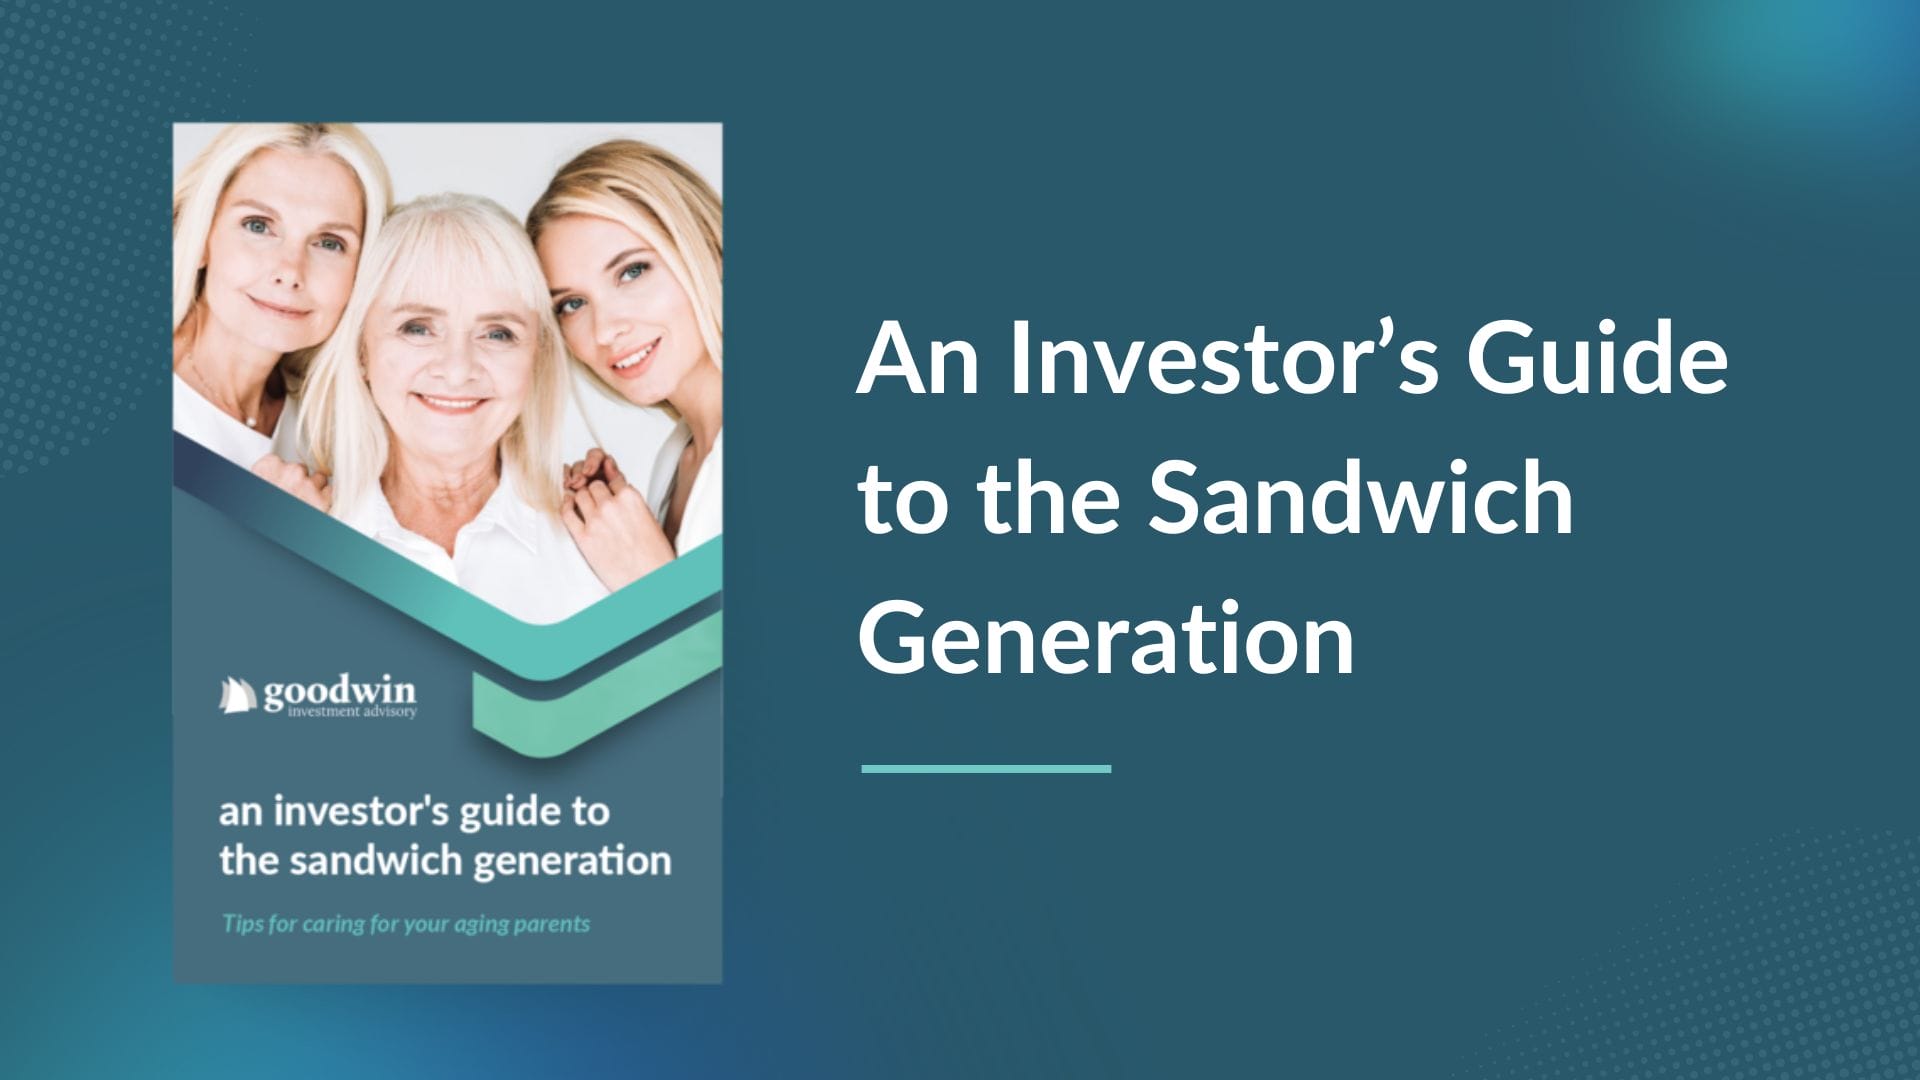 An Investor’s Guide to the Sandwich Generation – tips for caring for your aging parents